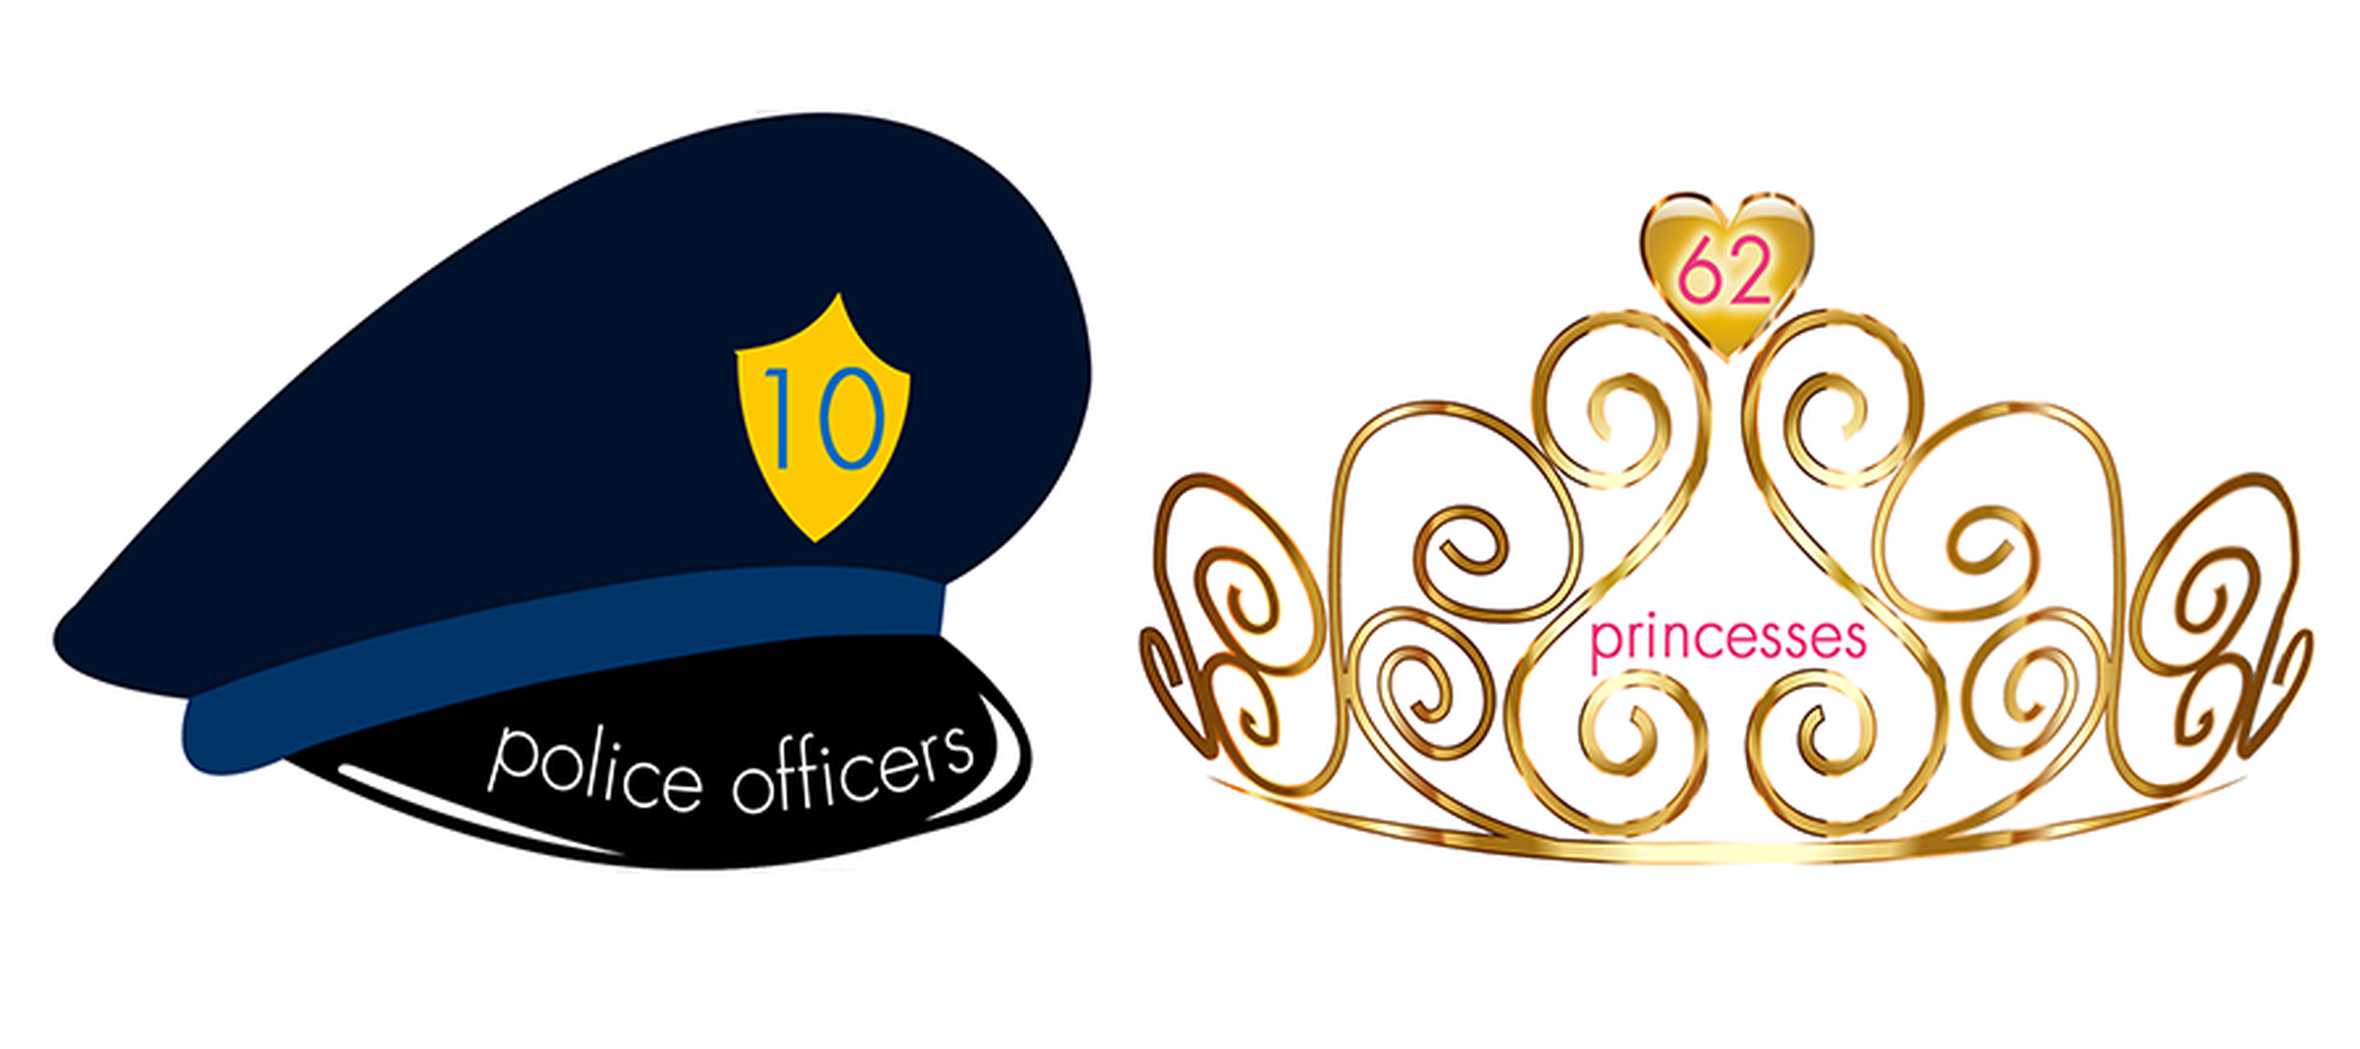 Cartoon of a Police hat and a tiara